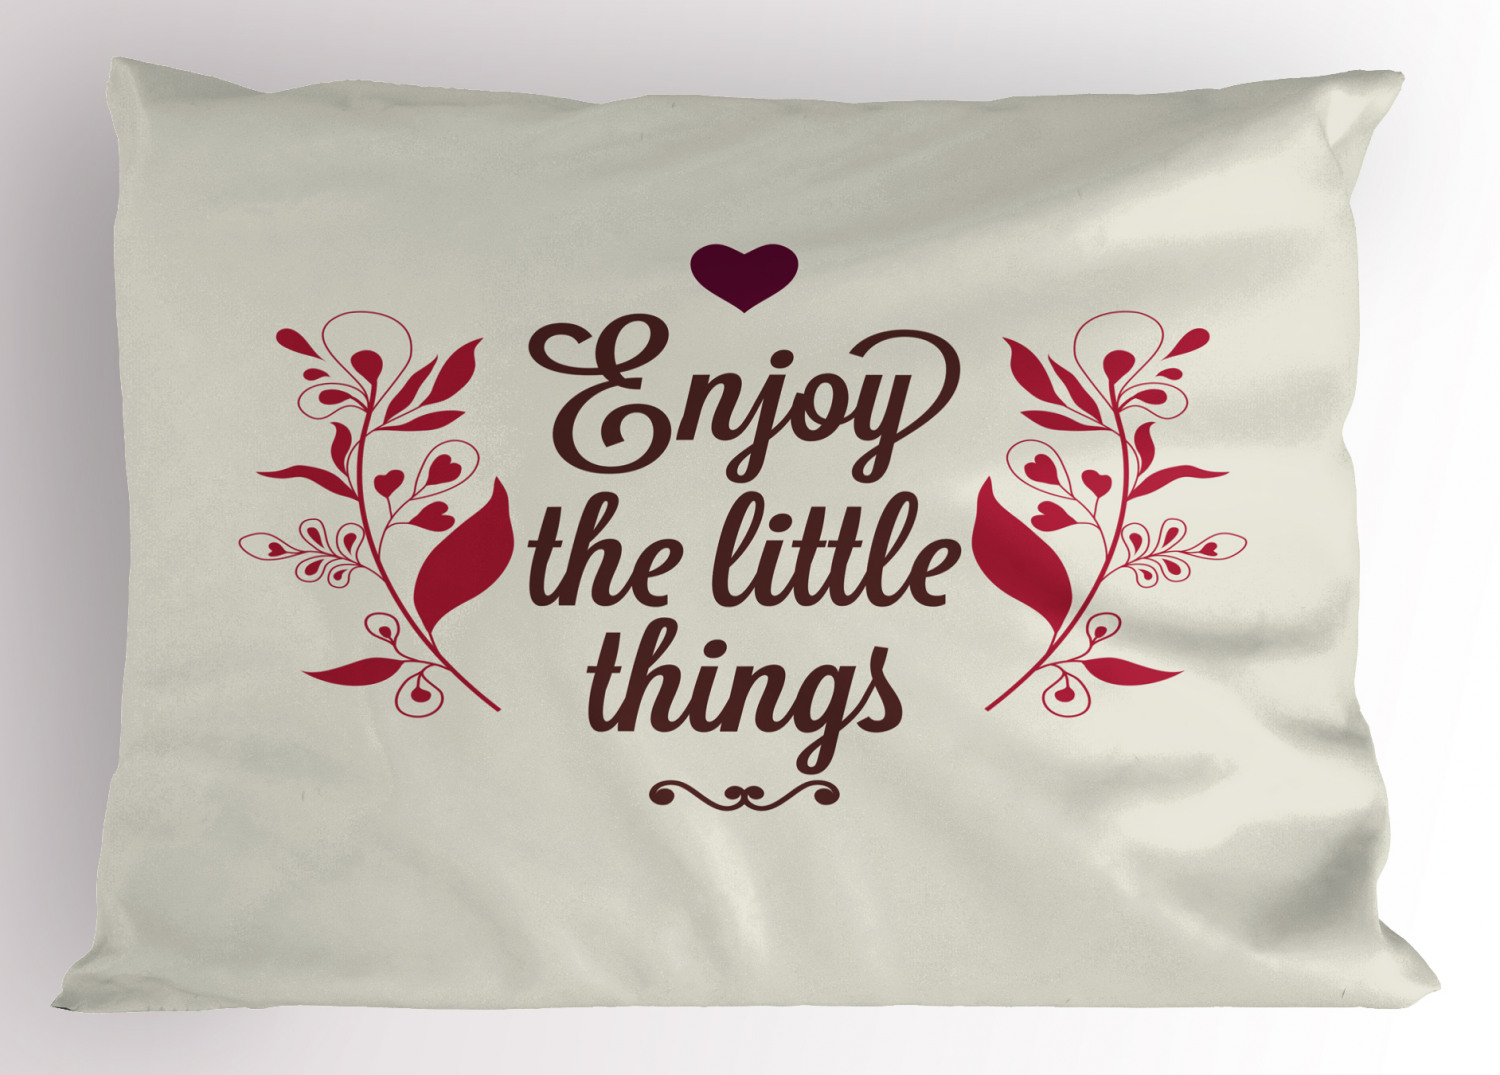 Enjoy the Little Things Pillow Sham Decorative Pillowcase 3 Sizes for Bedroom 